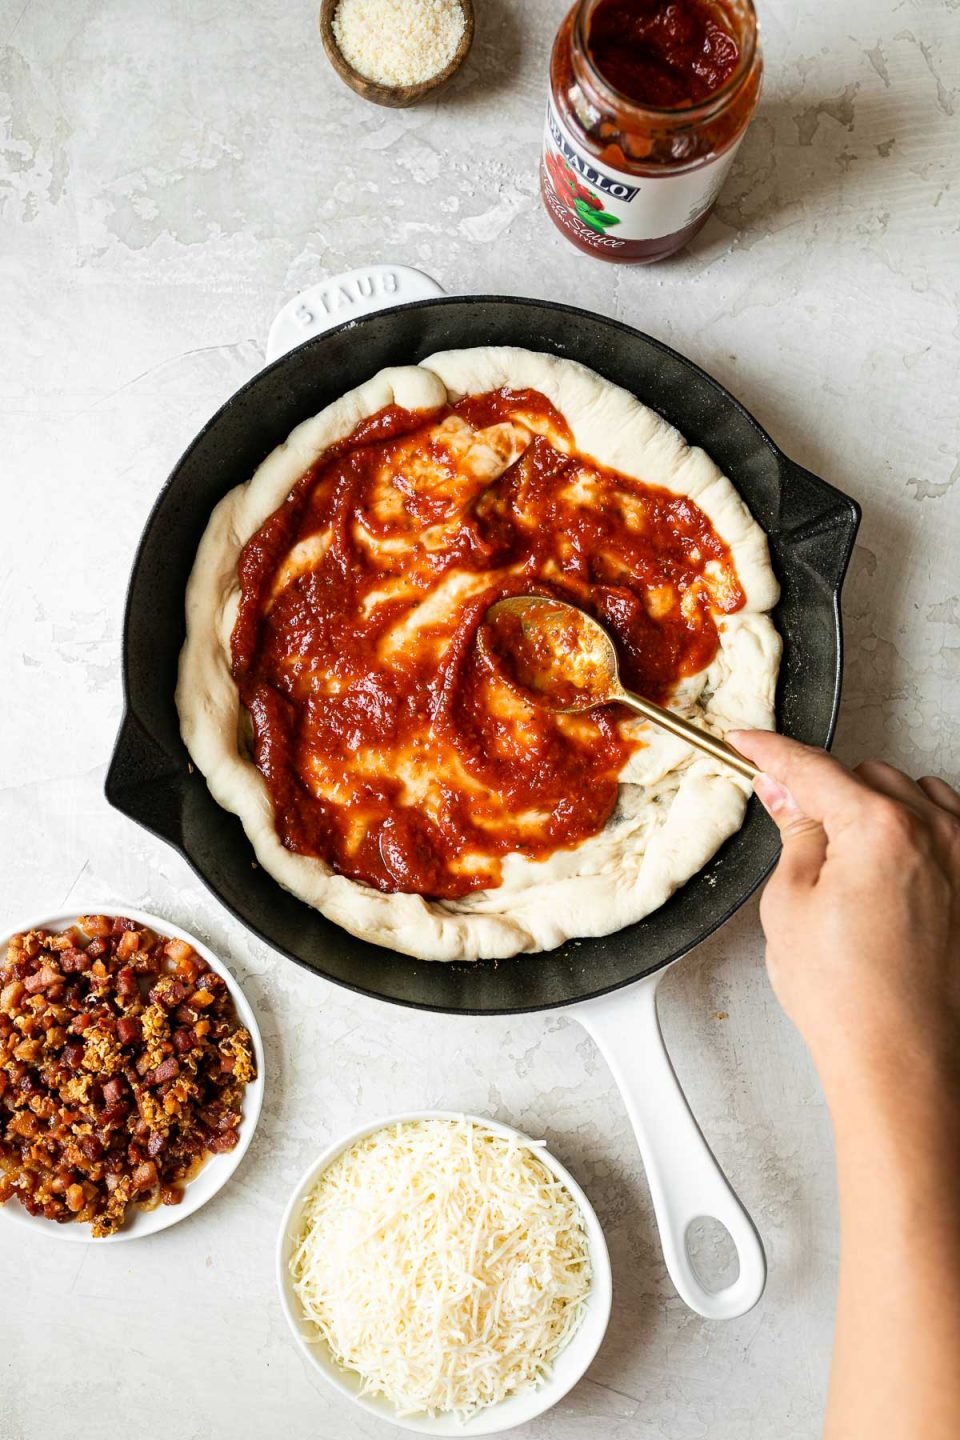 A woman's hand reaching into the frame with a gold spoon, spreading DeLallo pizza sauce over pizza crust formed in a white Staub cast iron skillet. The skillet sits on a white surface, surrounded by parmesan cheese, a jar of DeLallo pizza sauce, fried pancetta & garlic, & shredded Italian cheese.